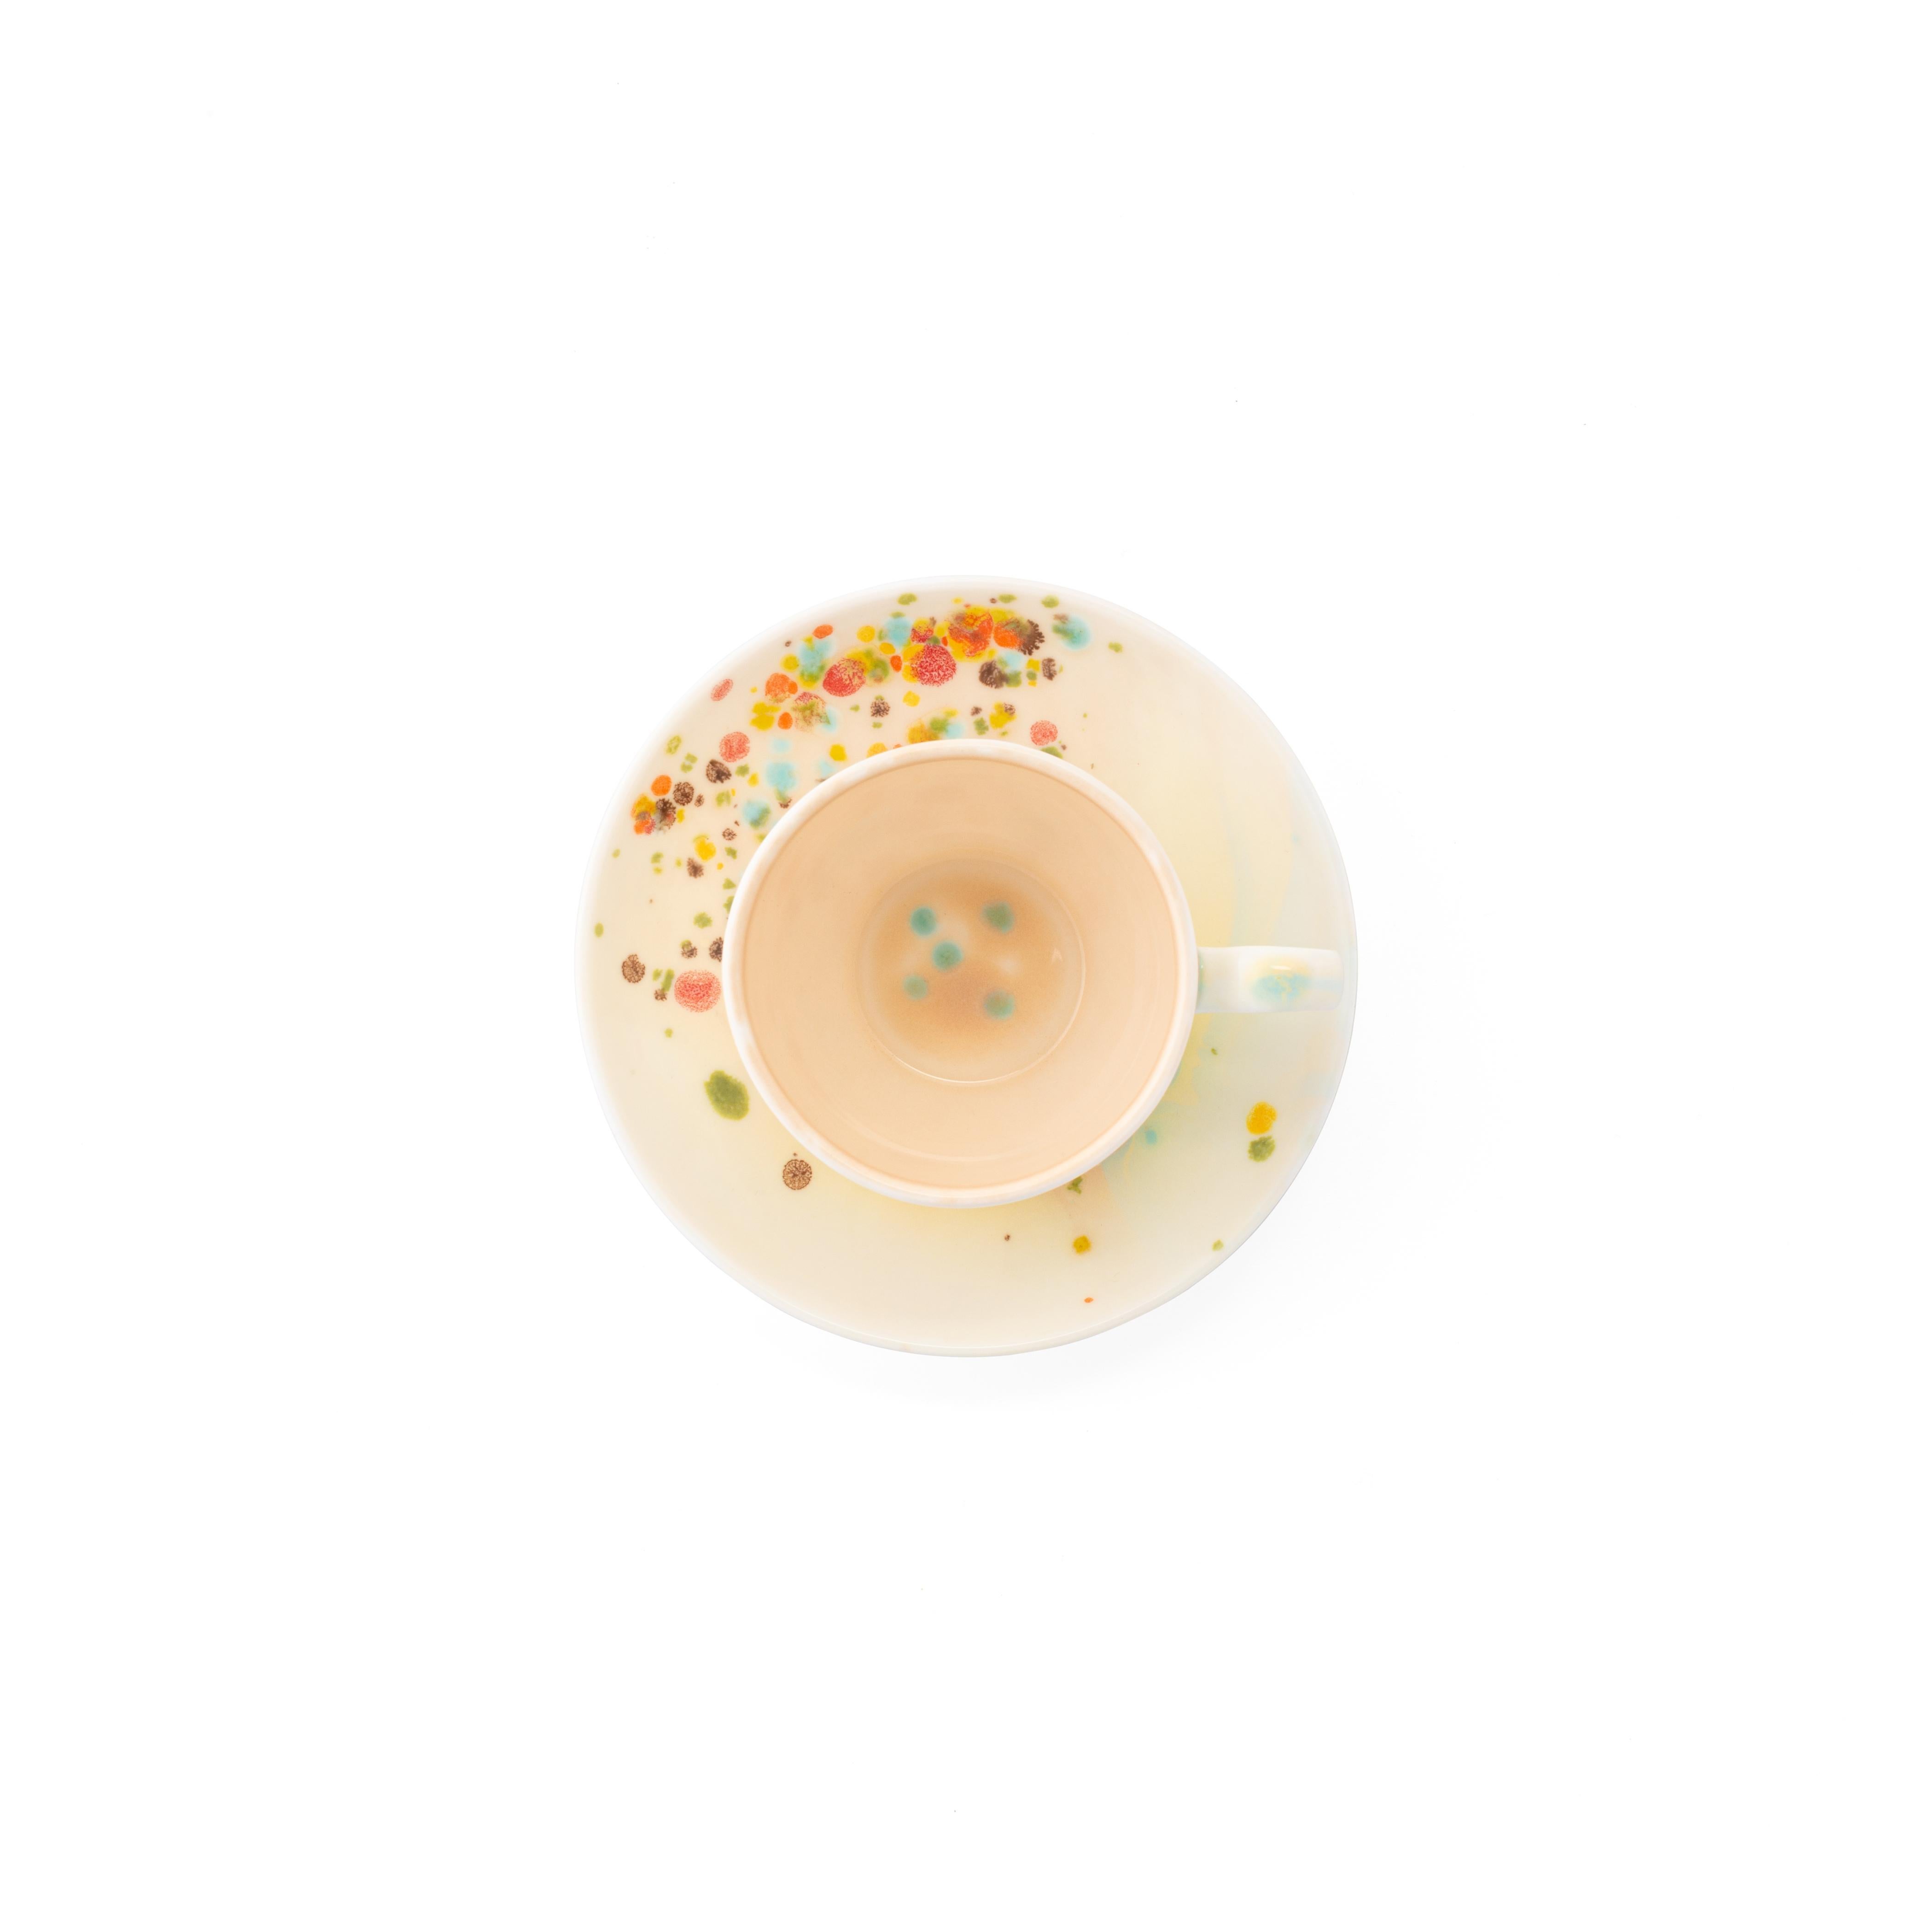 Handcrafted in Italy from the finest porcelain, these 2 coffee cups and saucers from the Chestnut Collection have a multicolor dotted decoration shaped as a Cascade while the inside is painted in a sandy color.

Set of 2 coffee cups and saucer, Ø